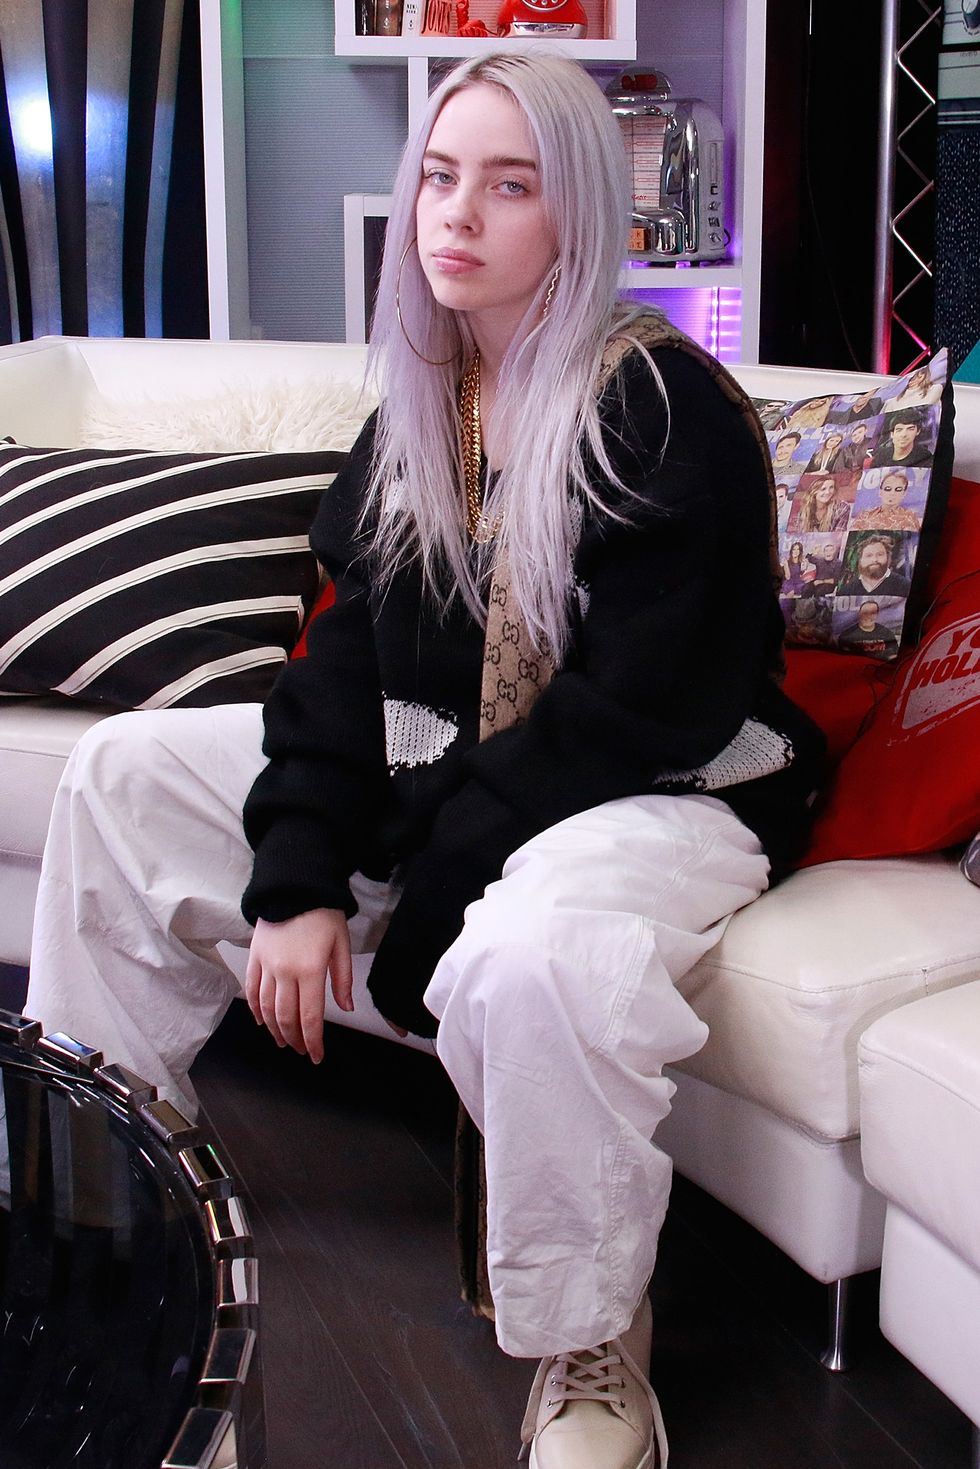 Billie Eilish Is a 15-Year-Old Pop Prodigy—And She's Intimidating as Hell